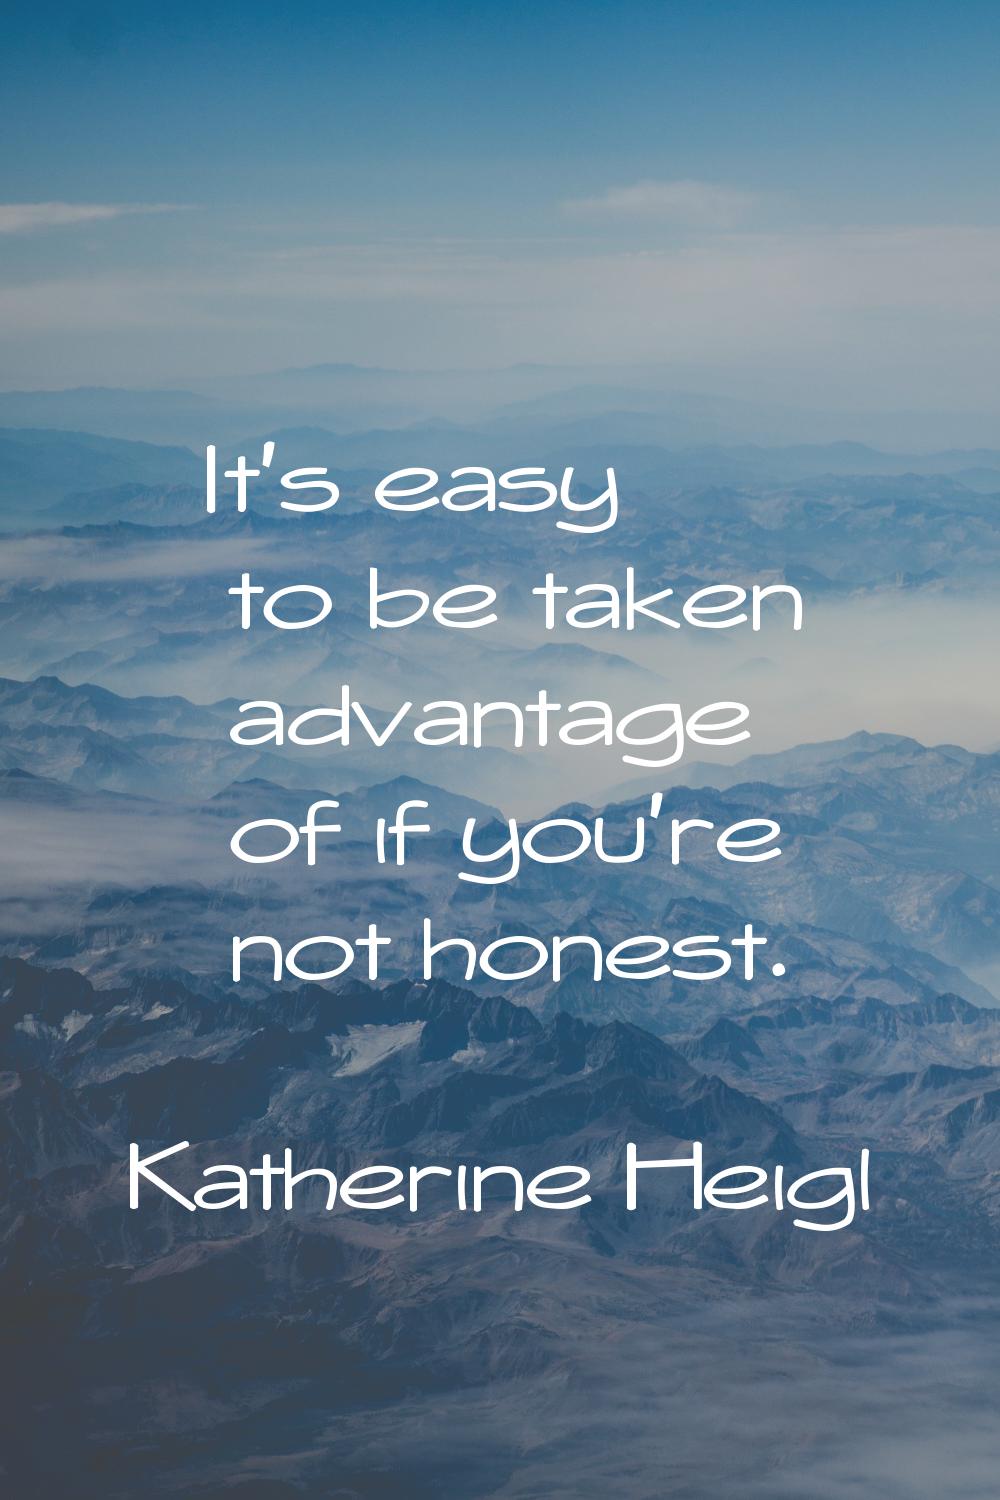 It's easy to be taken advantage of if you're not honest.